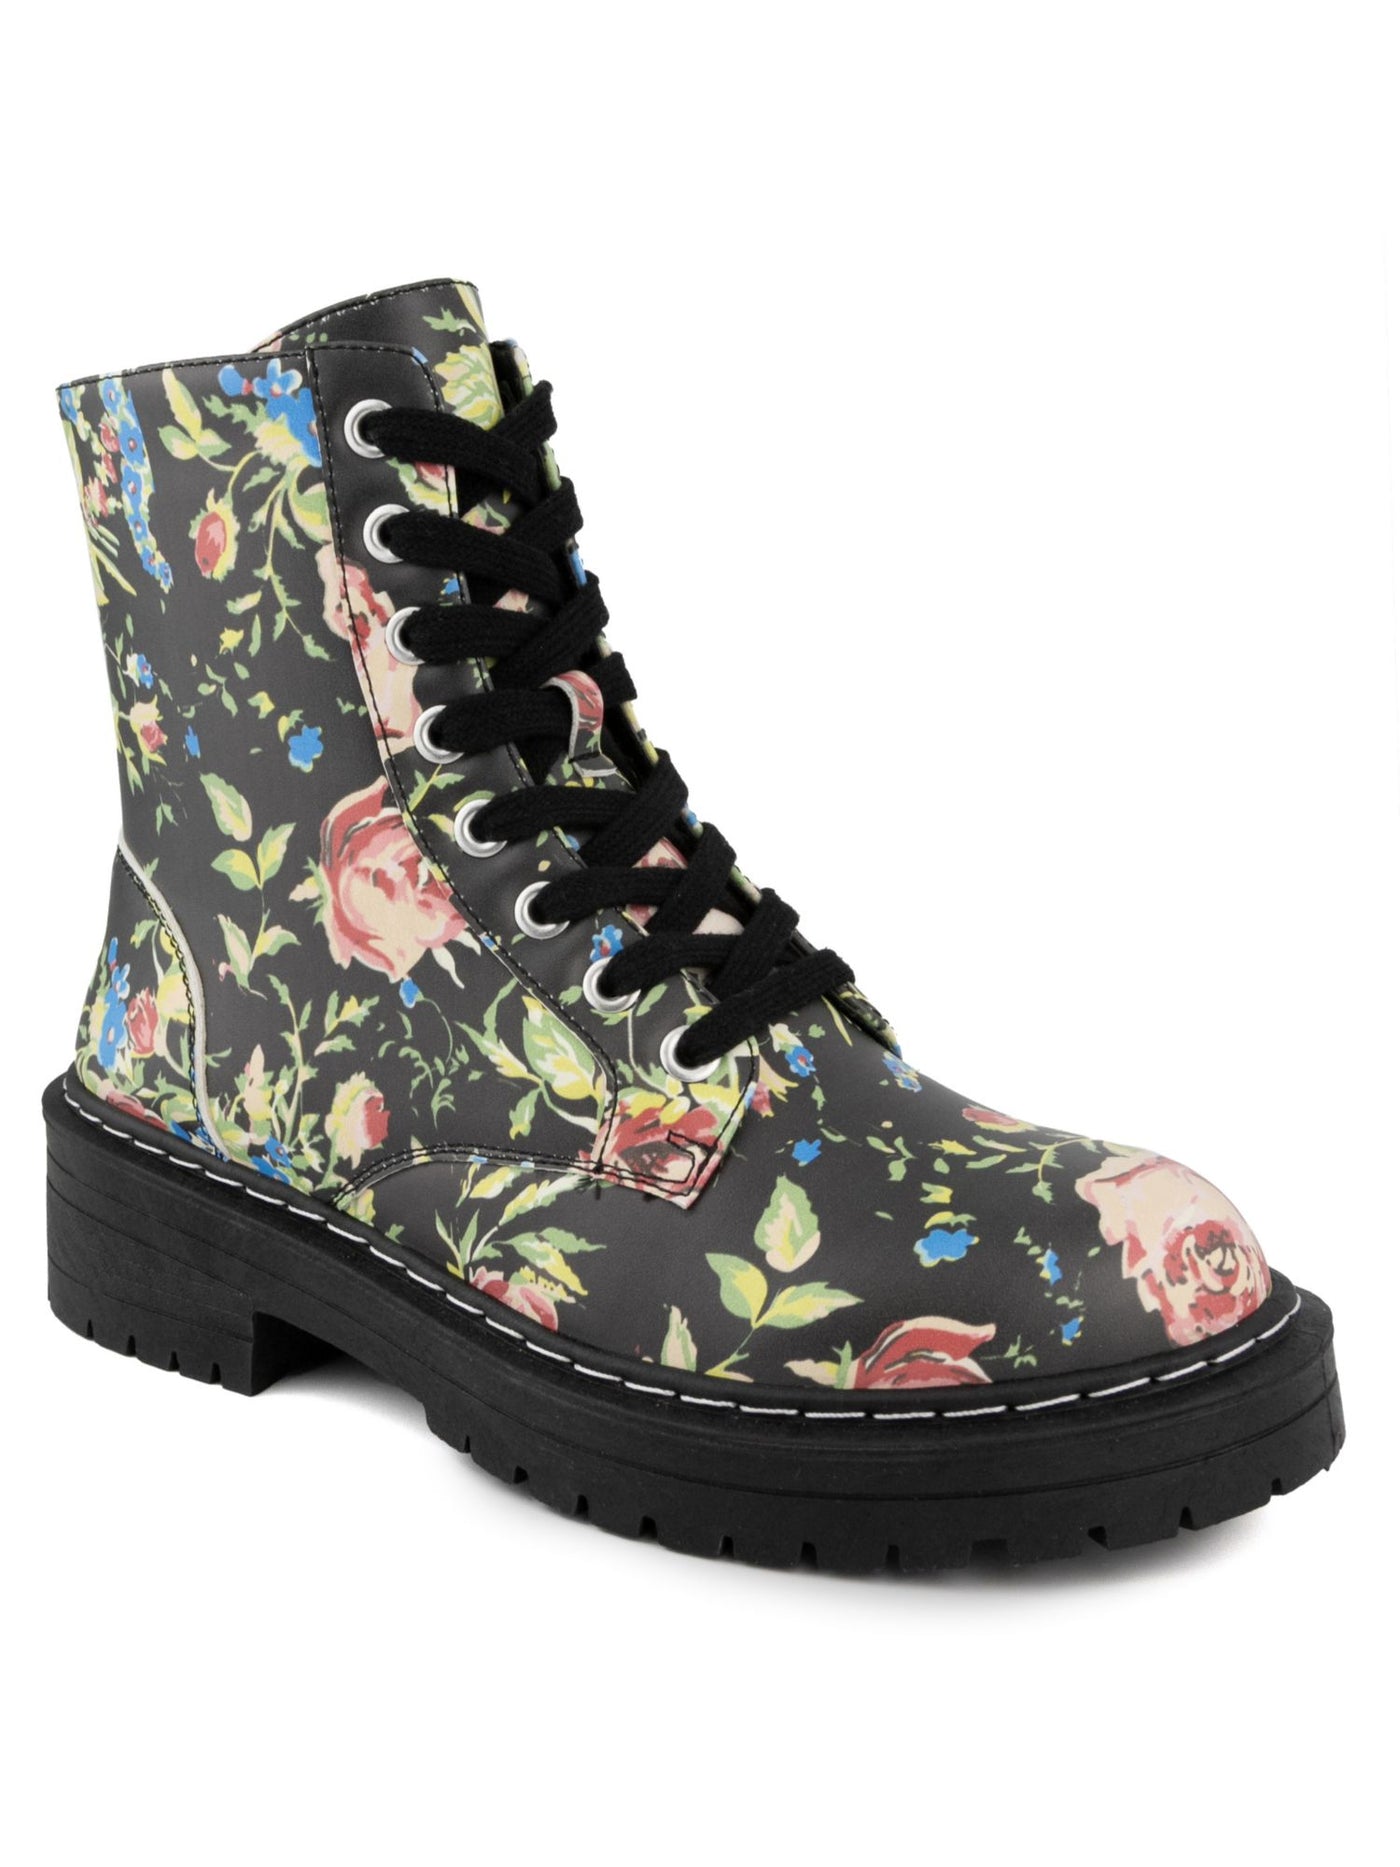 SUGAR Womens Black Floral Lace-Up Front Stitch Detailing Cushioned Kaedy Round Toe Block Heel Zip-Up Combat Boots 7.5 M